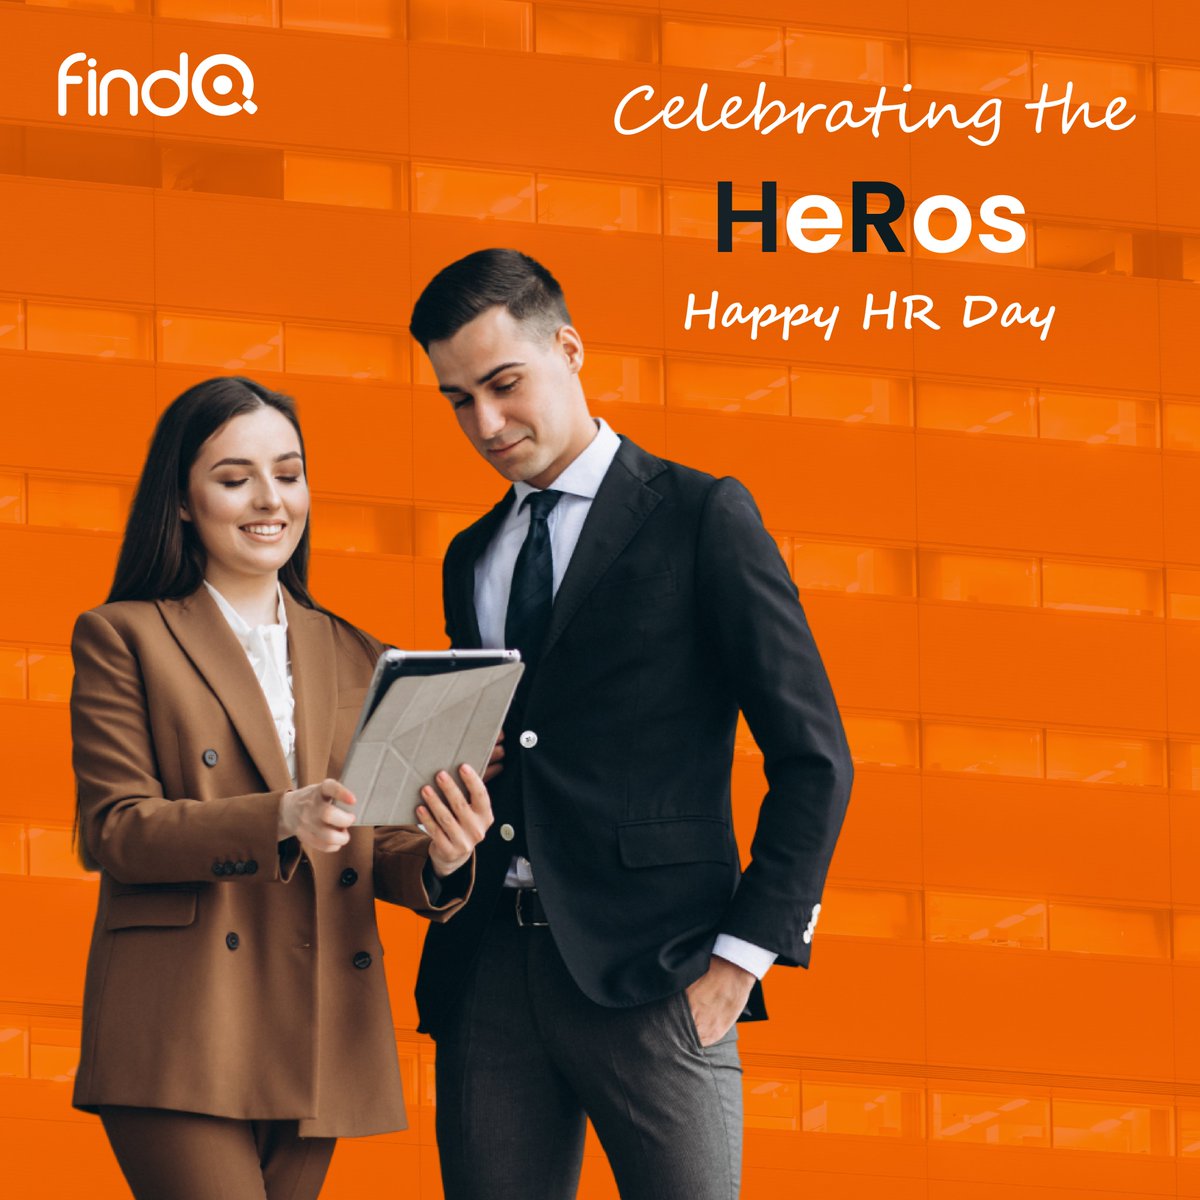 HR professionals are the backbone of every successful organization,

fueling growth and ensuring excellence in the world of work.

Let's honor their dedication and expertise in driving organizational success.

#findq #humanresources #recruitment 
#QueueYourRecruitmentWithUs